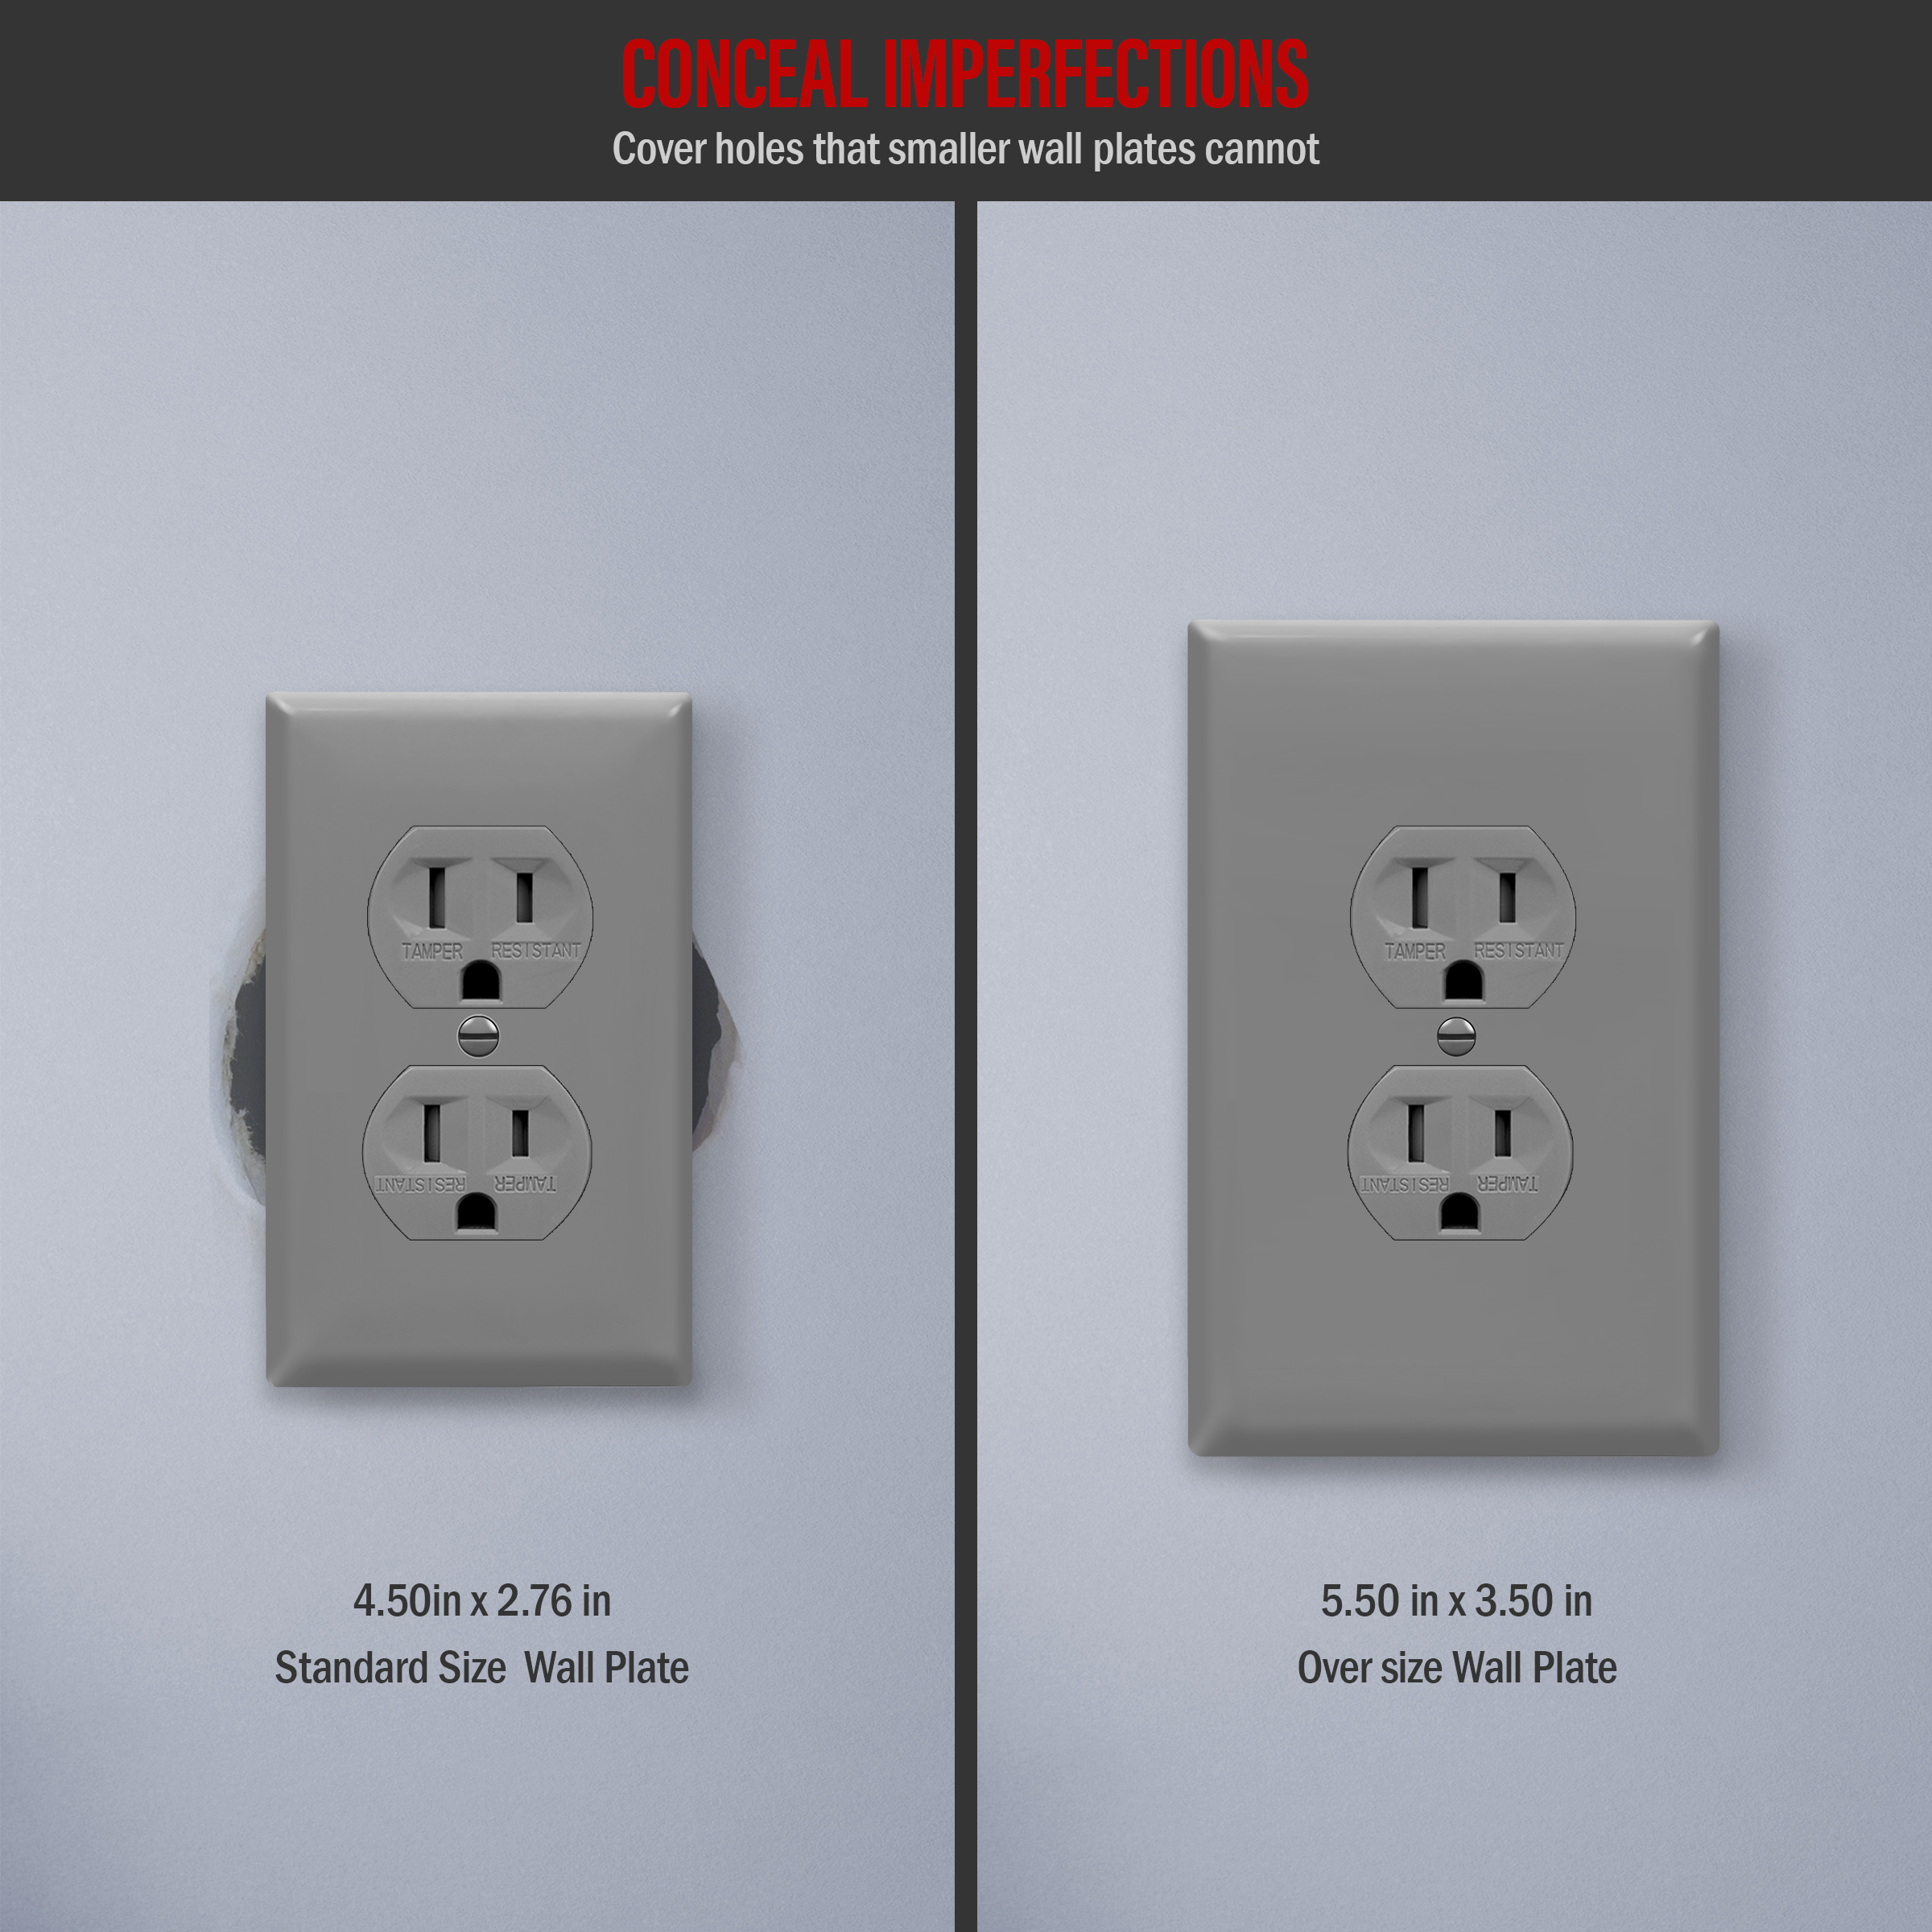 ENERLITES Duplex Receptacle Outlet Wall Plate, Jumbo Electrical Outlet Cover, Gloss Finish, Oversized 1-Gang, Polycarbonate Thermoplastic, 8821O-GY, Gray - image 2 of 5